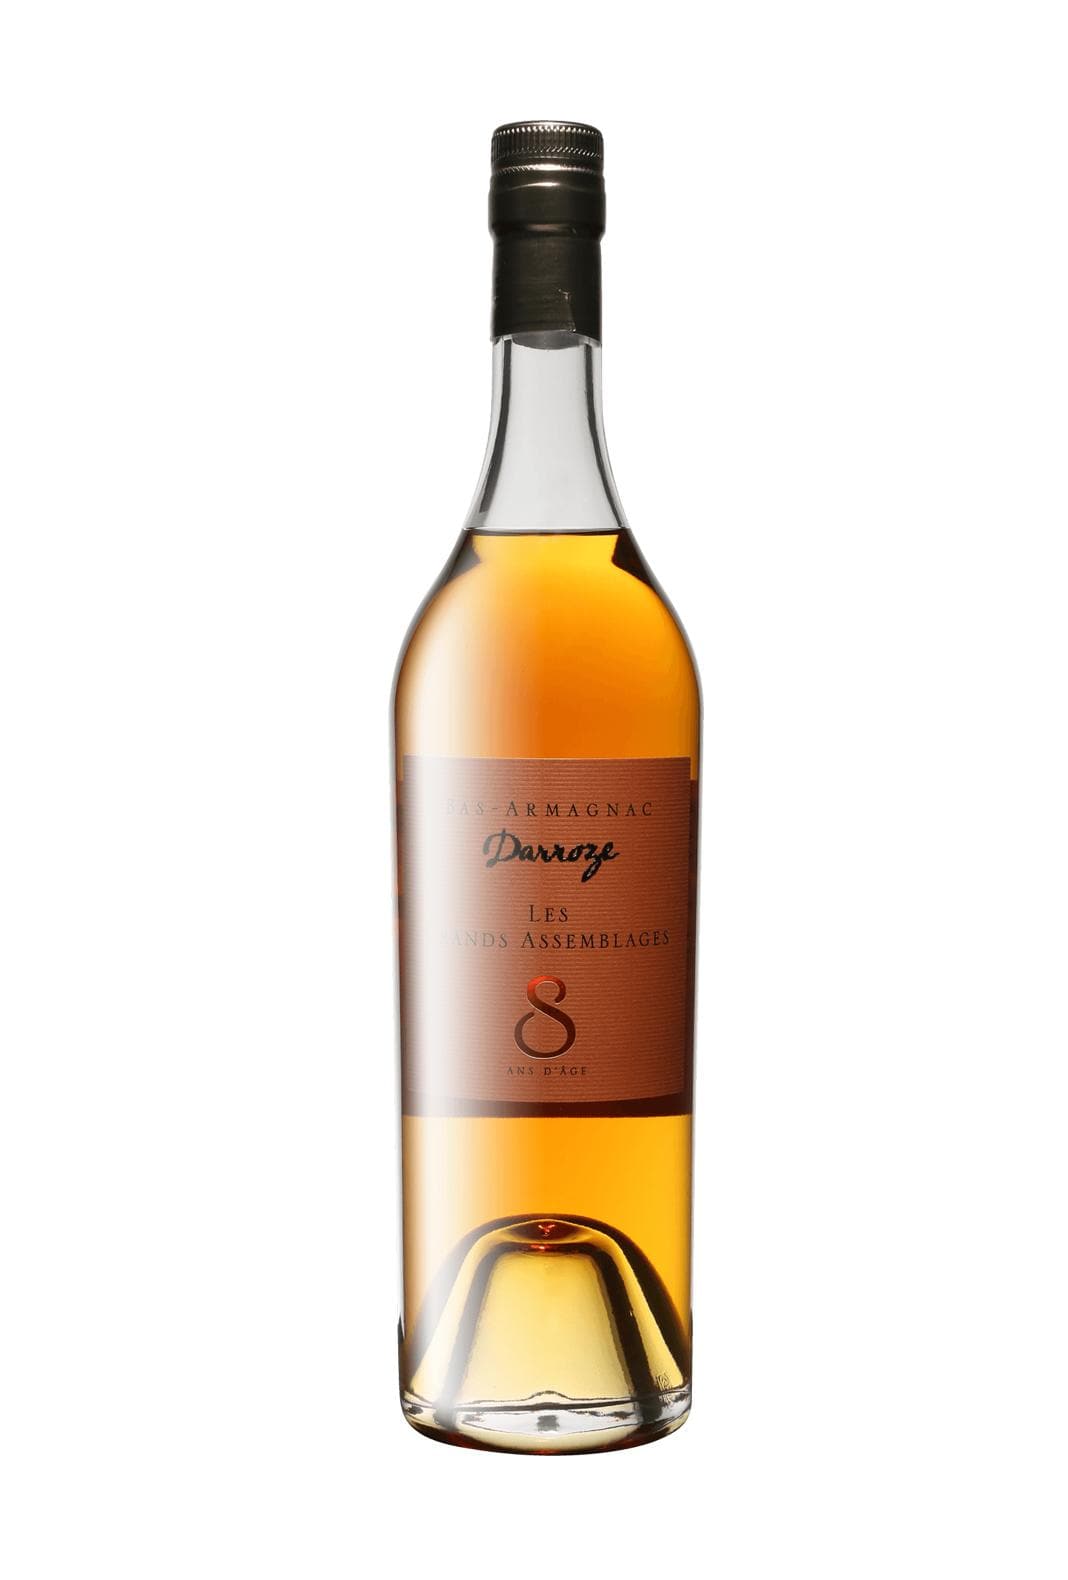 Darroze Bas Armagnac Les Grands Assemblages 8 years 43% 700ml | Brandy | Shop online at Spirits of France